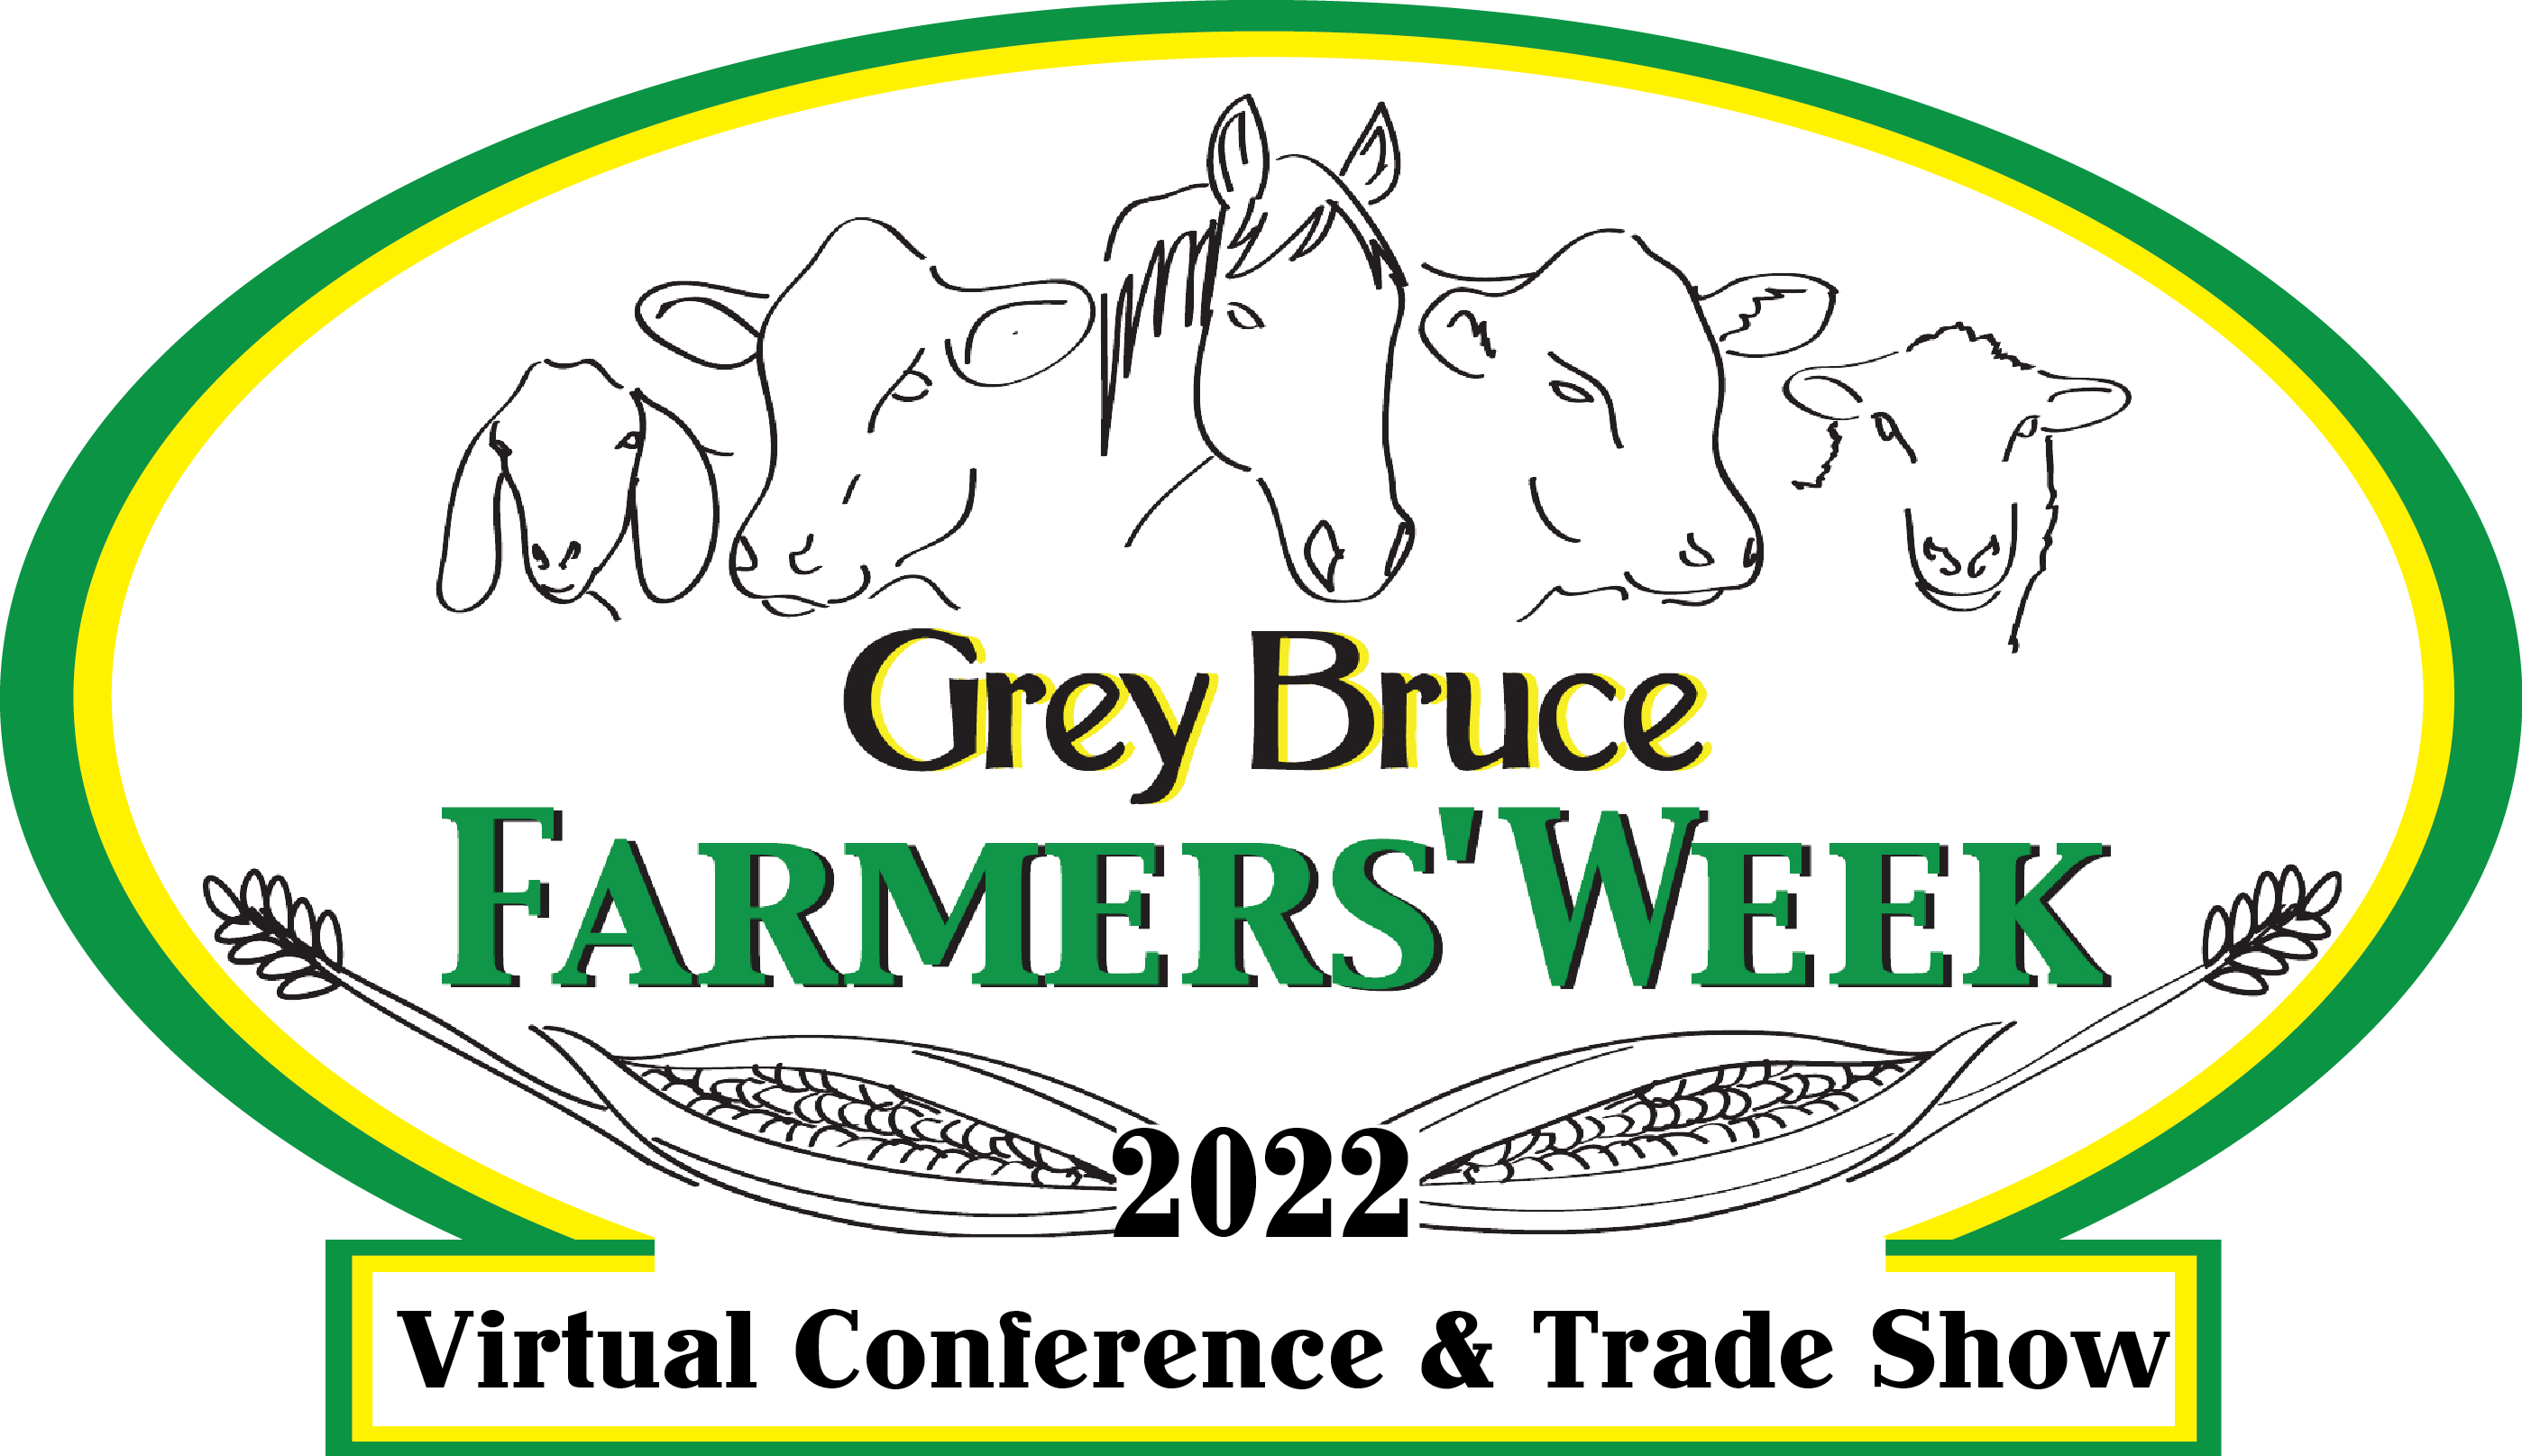 56th grey bruce farmers week conference will be virtual